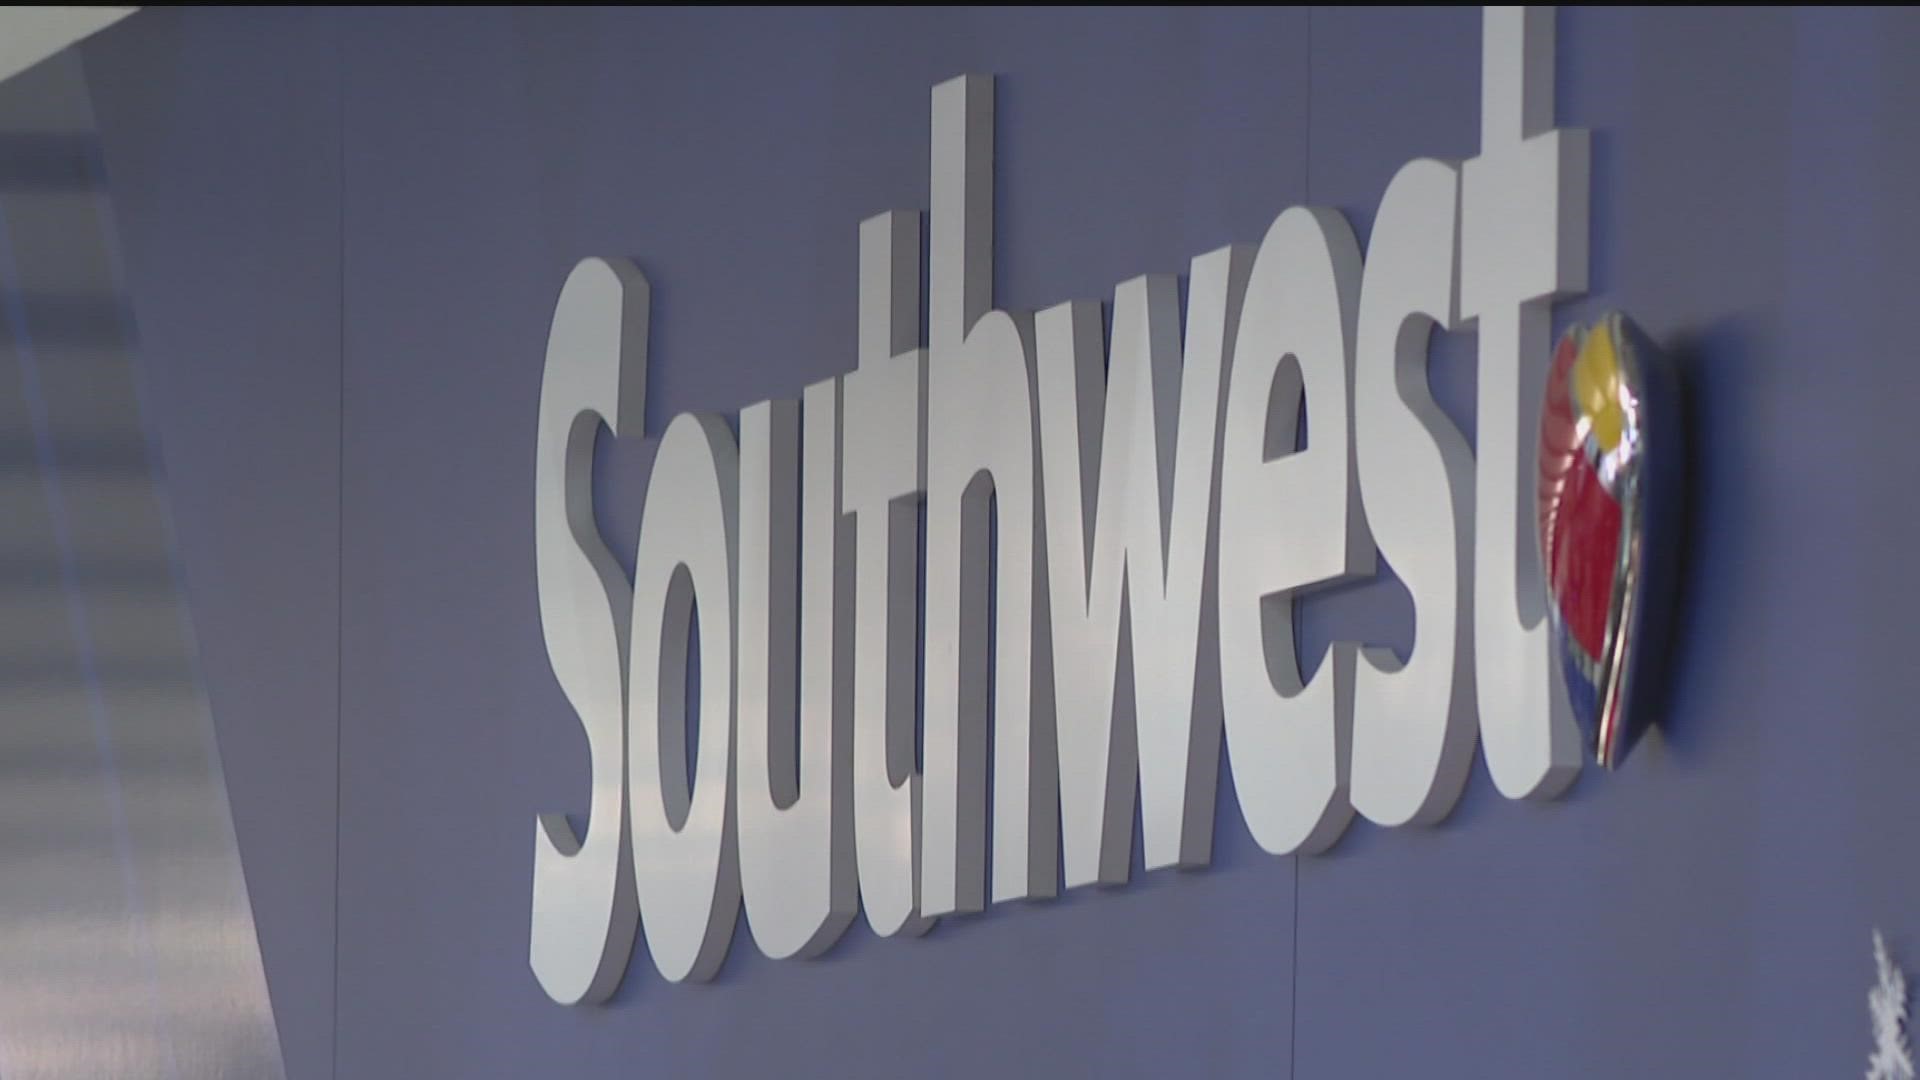 Southwest Airlines on Monday canceled about 10 times as many flights as any other major U.S. carrier, according to the tracking site FlightAware.